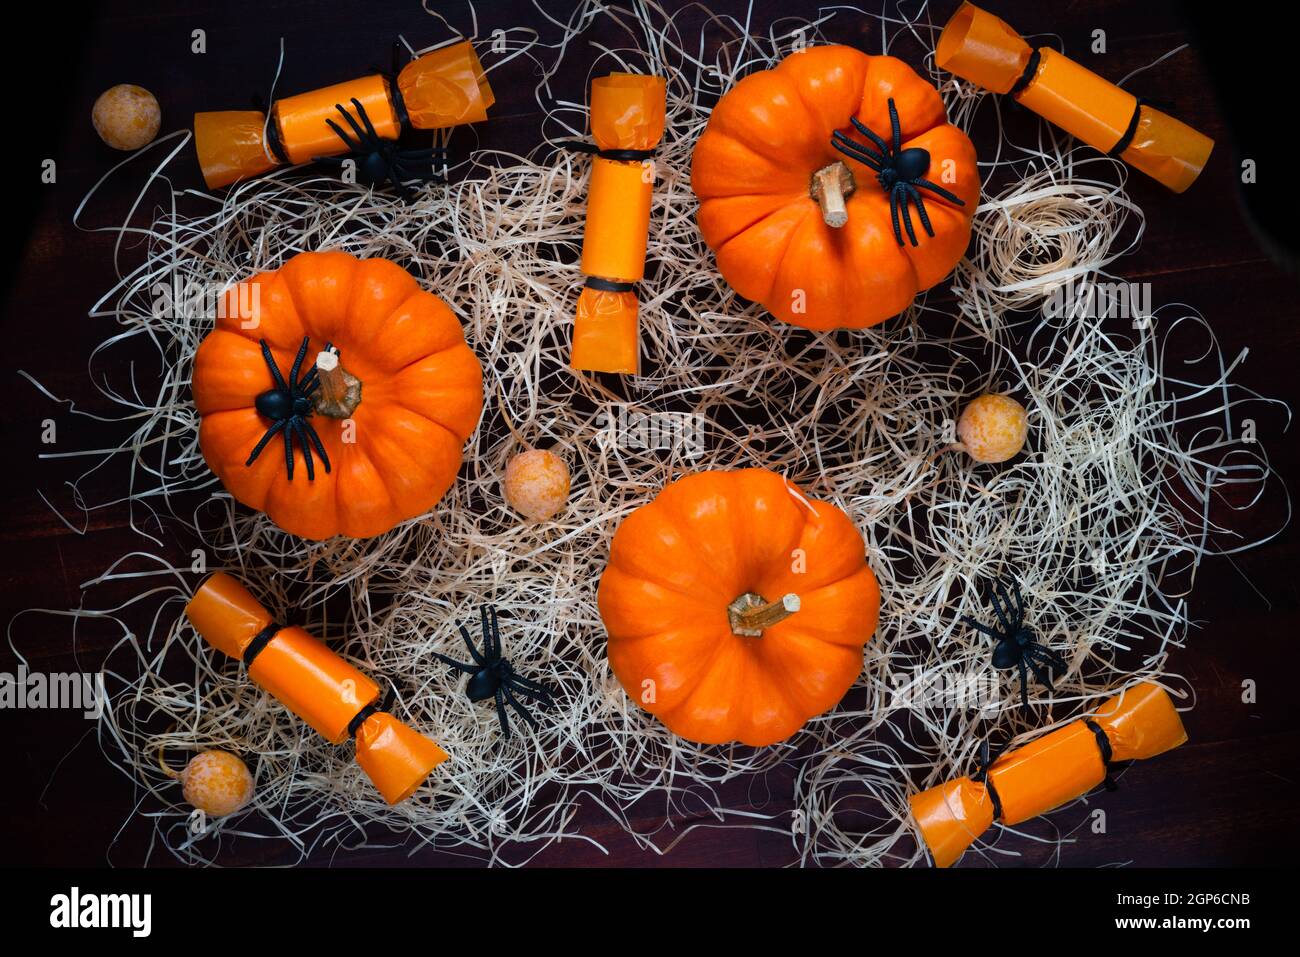 pumpkins, candies, spiders and straw over black background, concept of Halloween party, top view Stock Photo